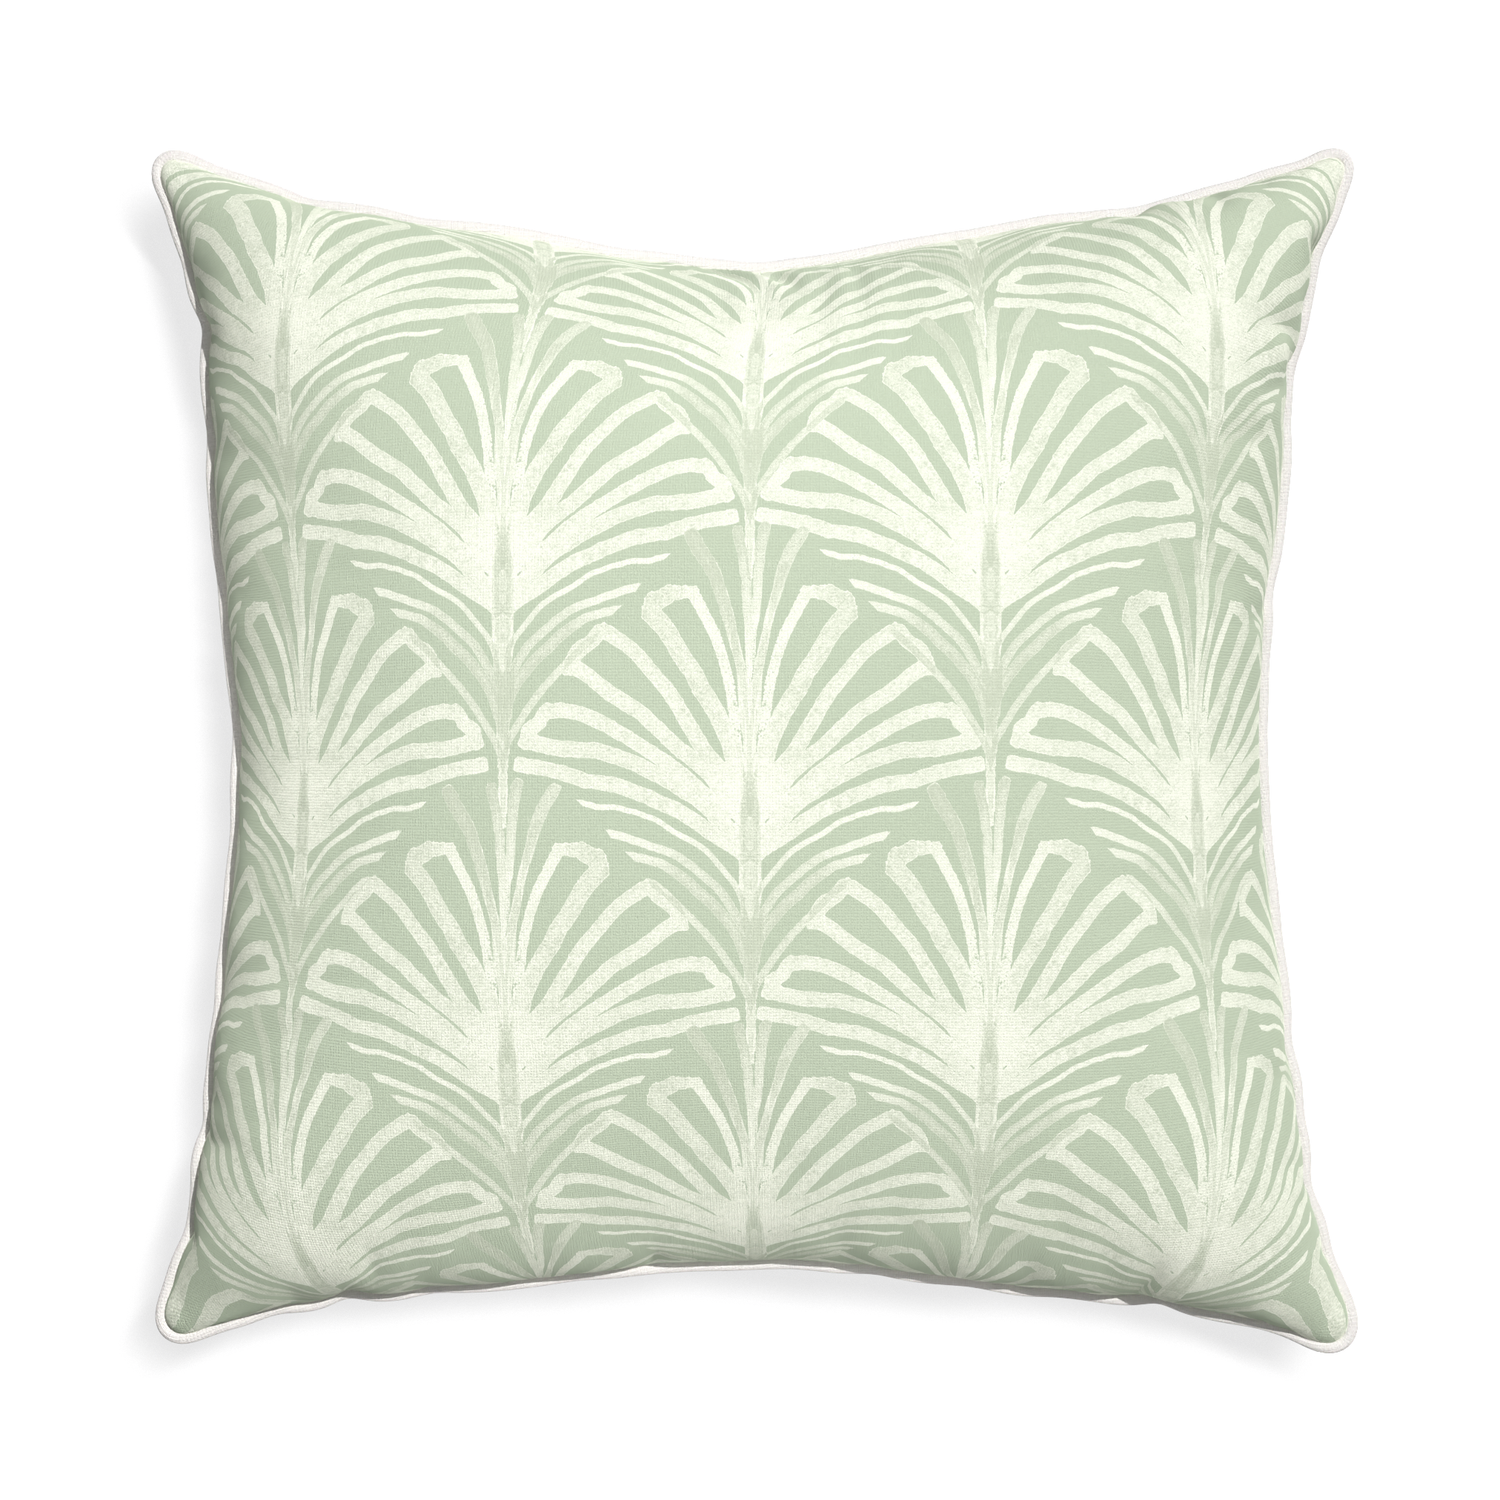 Euro-sham suzy sage custom pillow with snow piping on white background